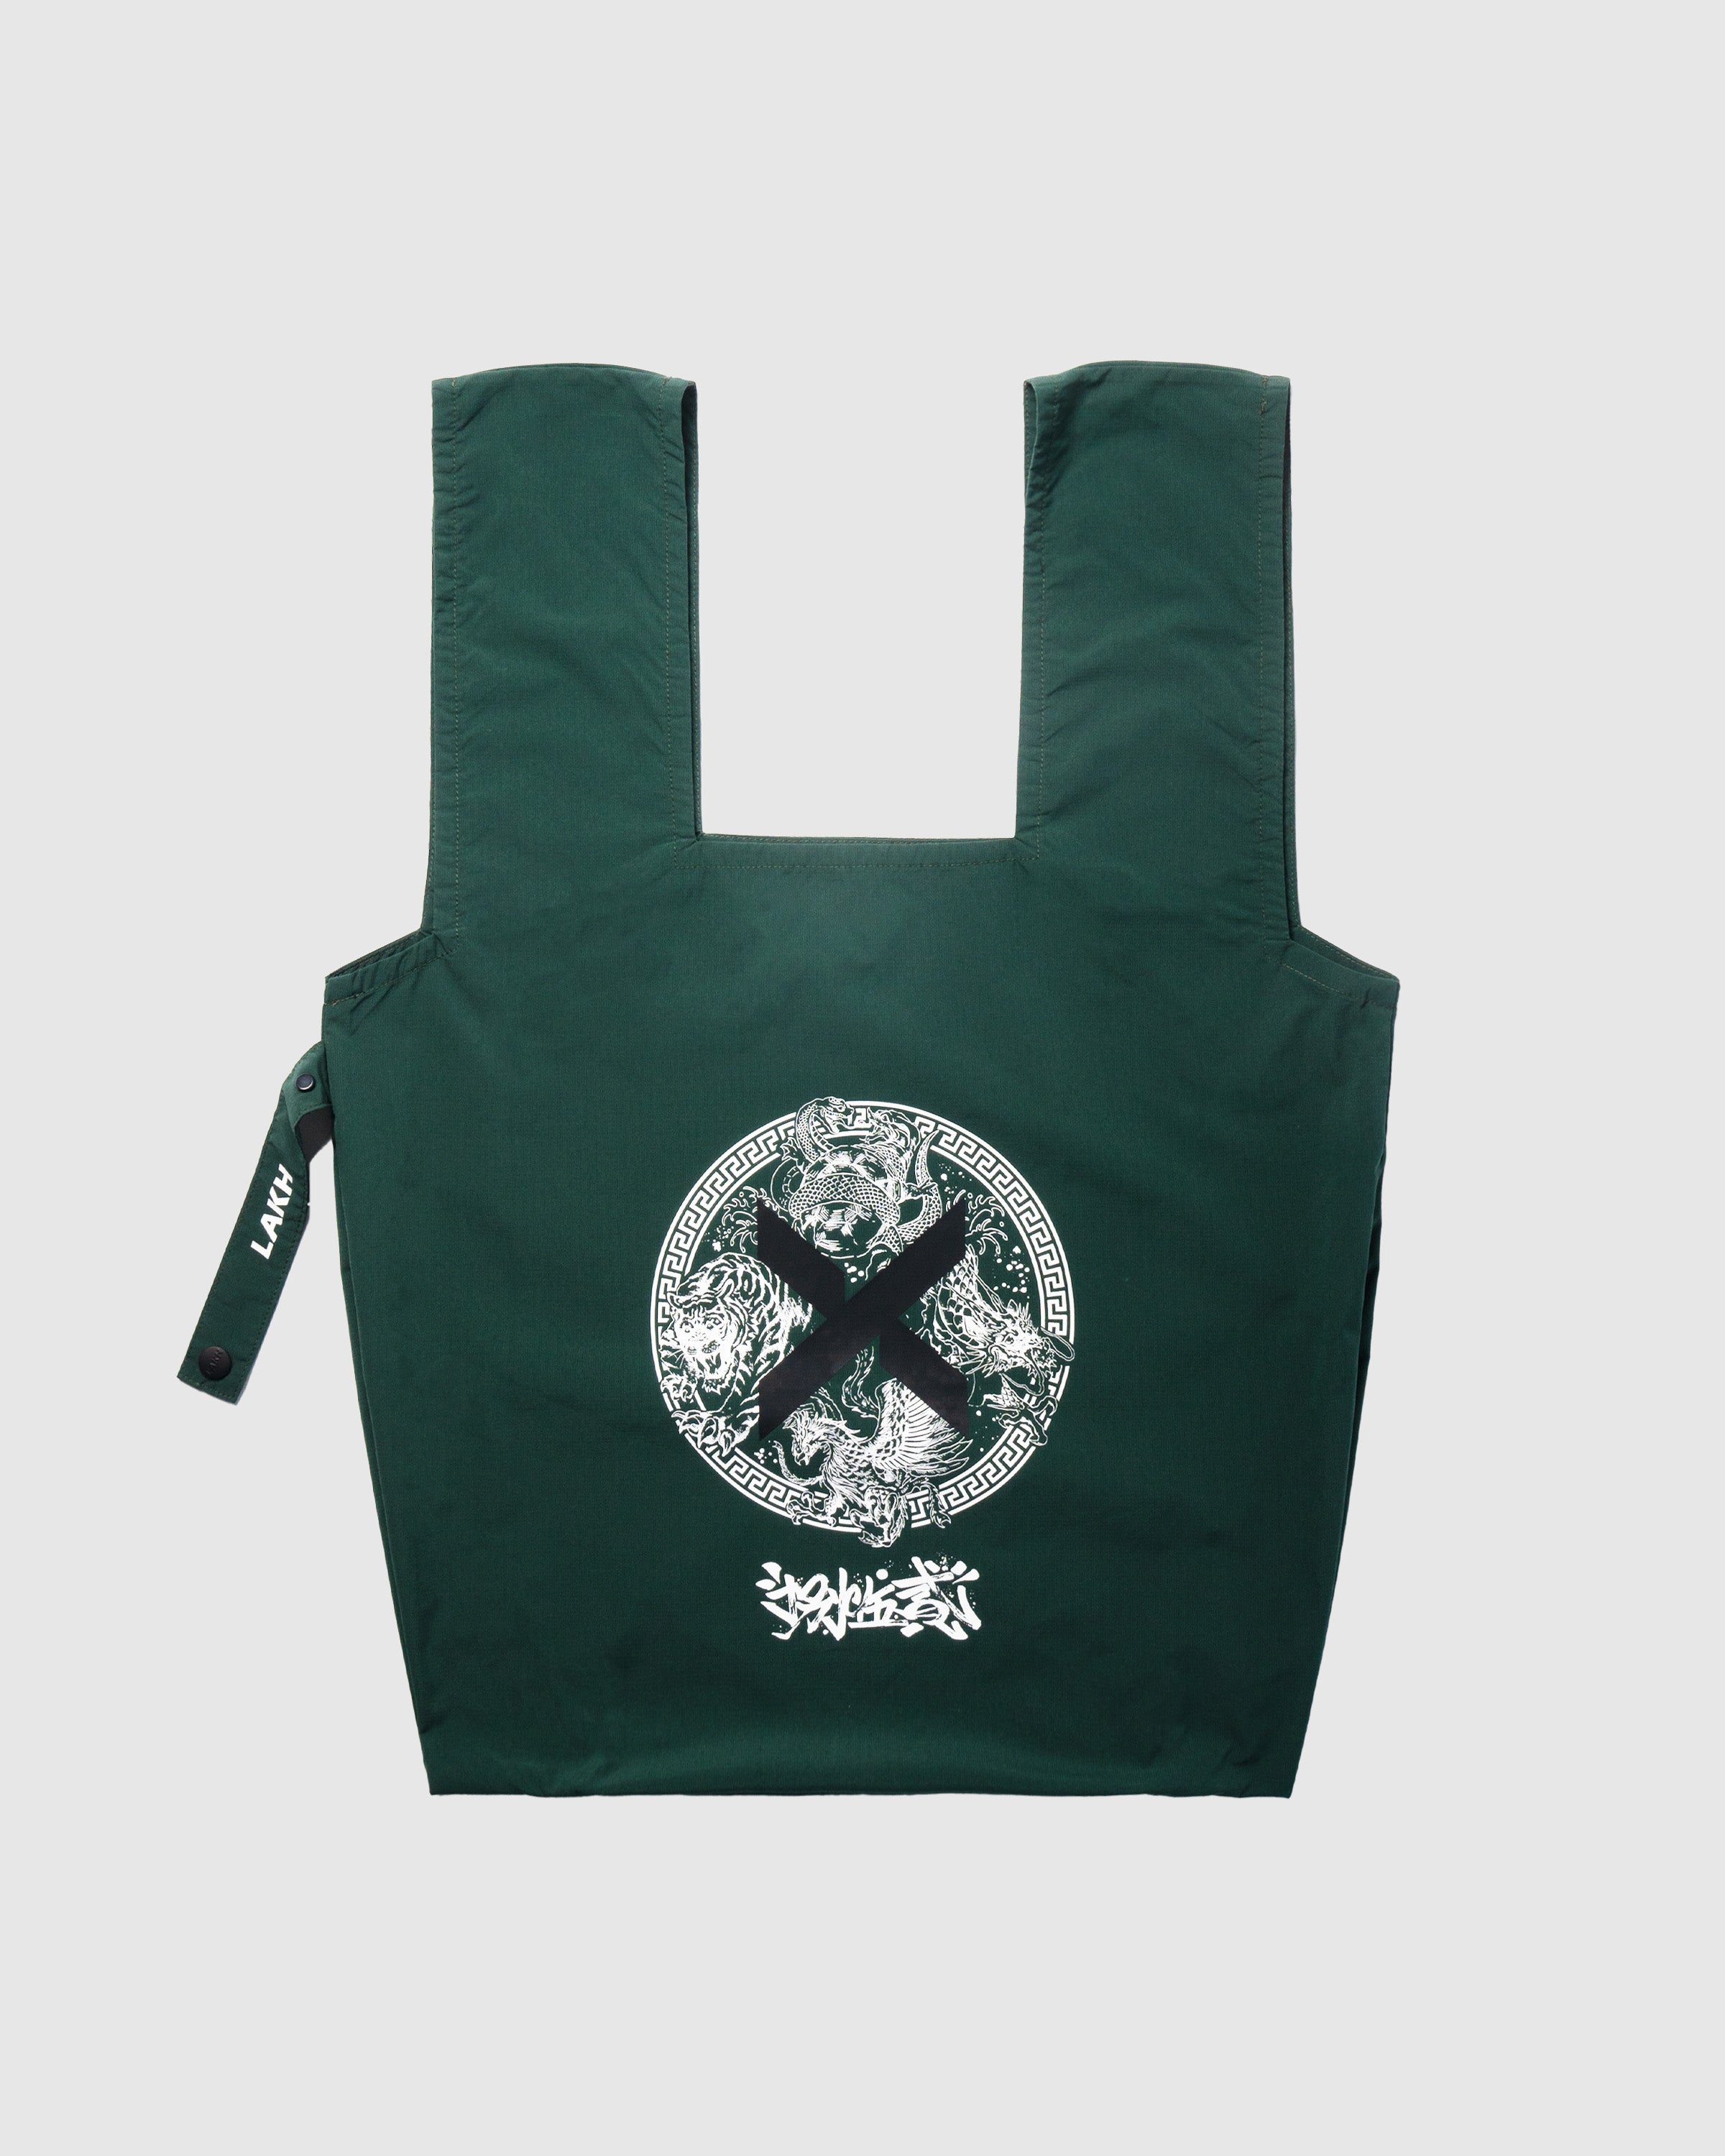 Four Saint Beasts Packable Tote Bag - Green